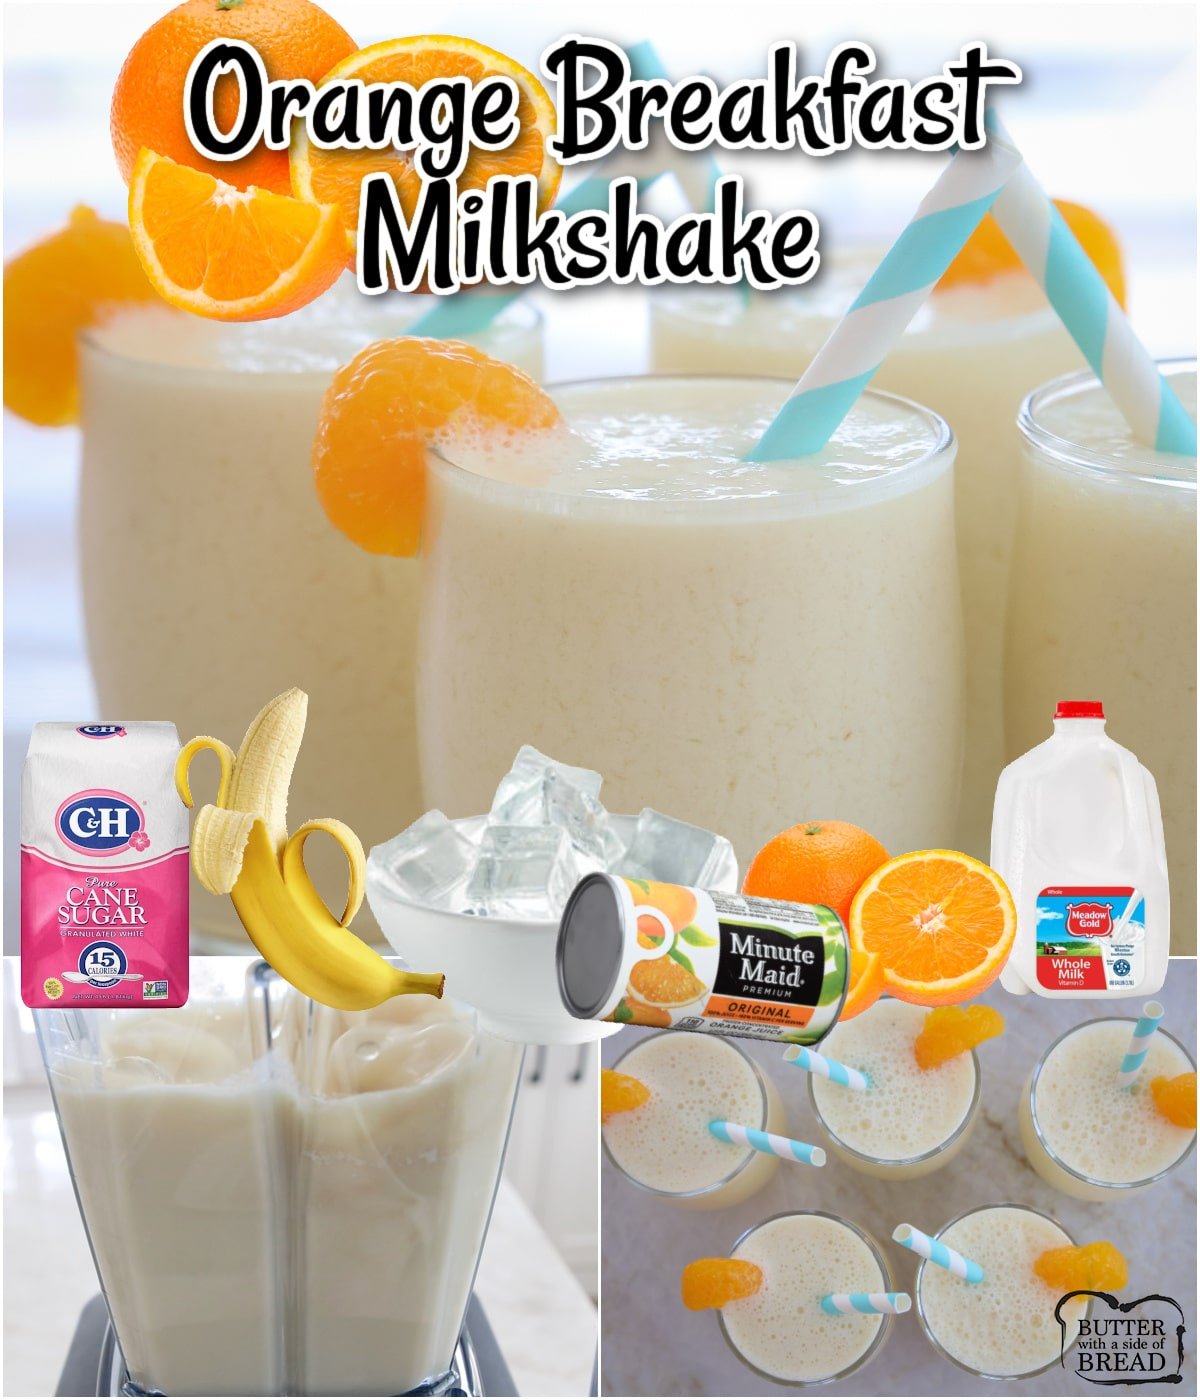 Orange Breakfast Milkshake made with orange juice concentrate, frozen banana, milk, & ice cubes; this orange banana smoothie is a great way to start the day!